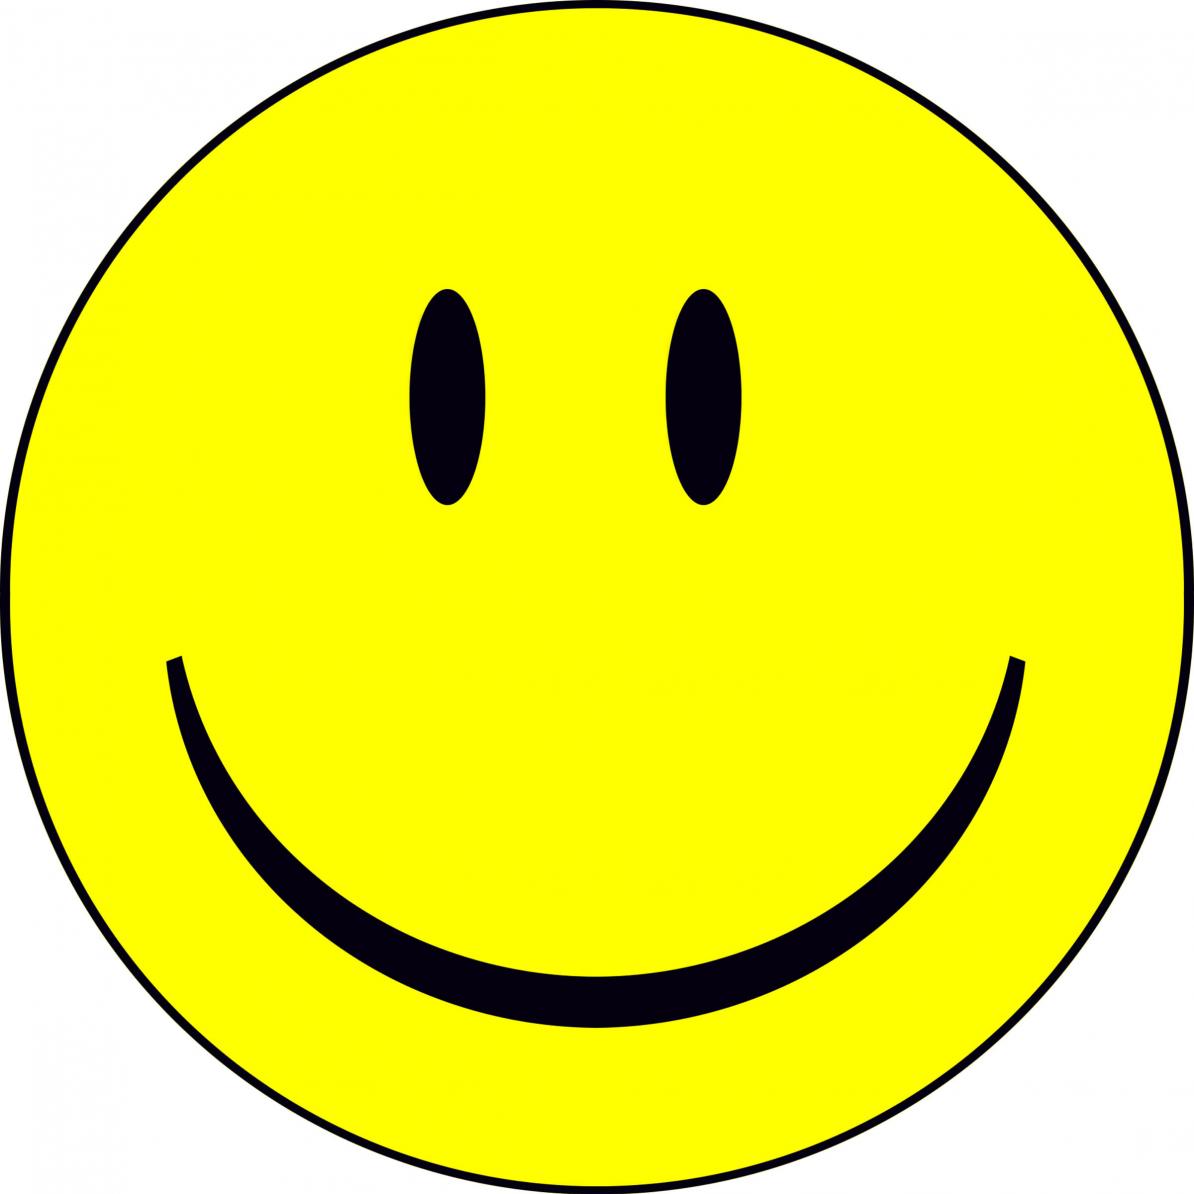 Free smile clipart images